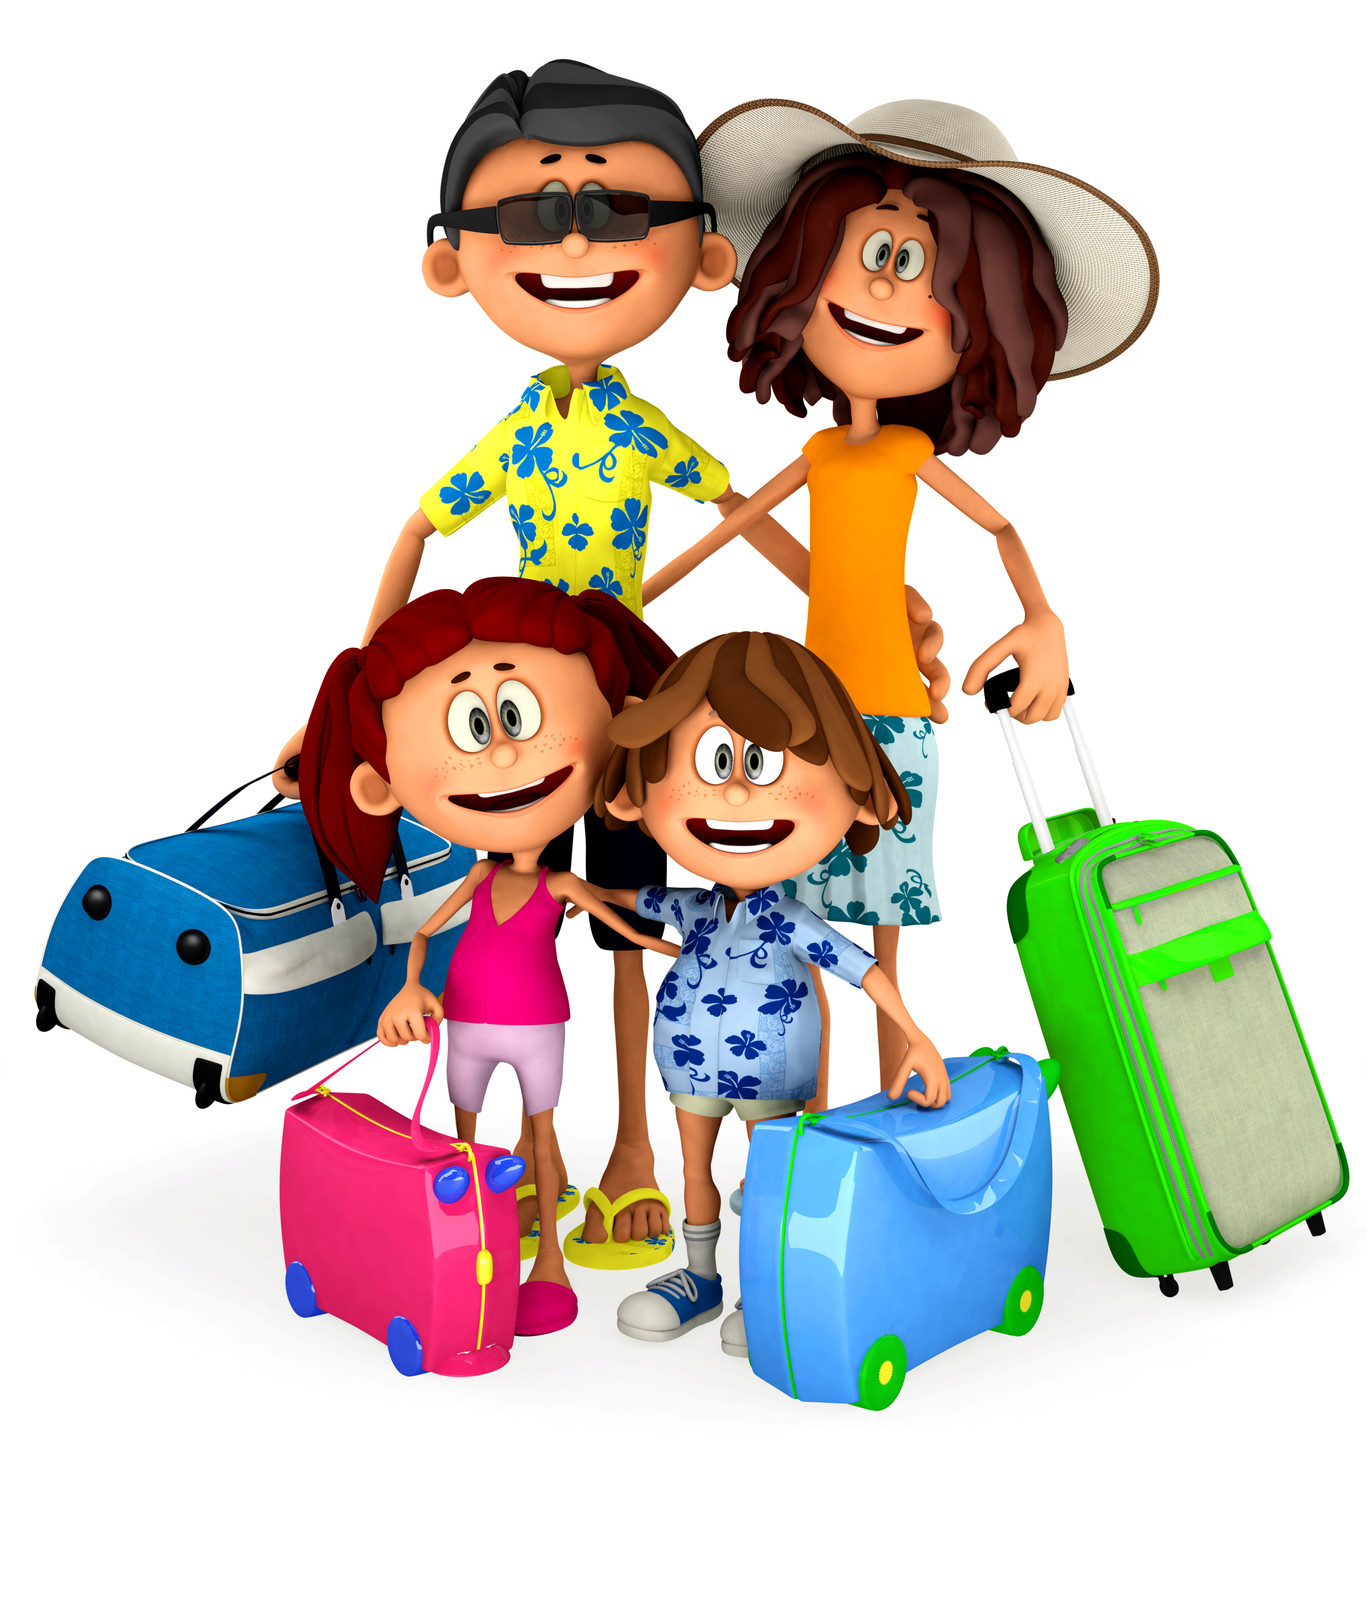 Vacation Images Illustrations Photos Free Download Png Clipart